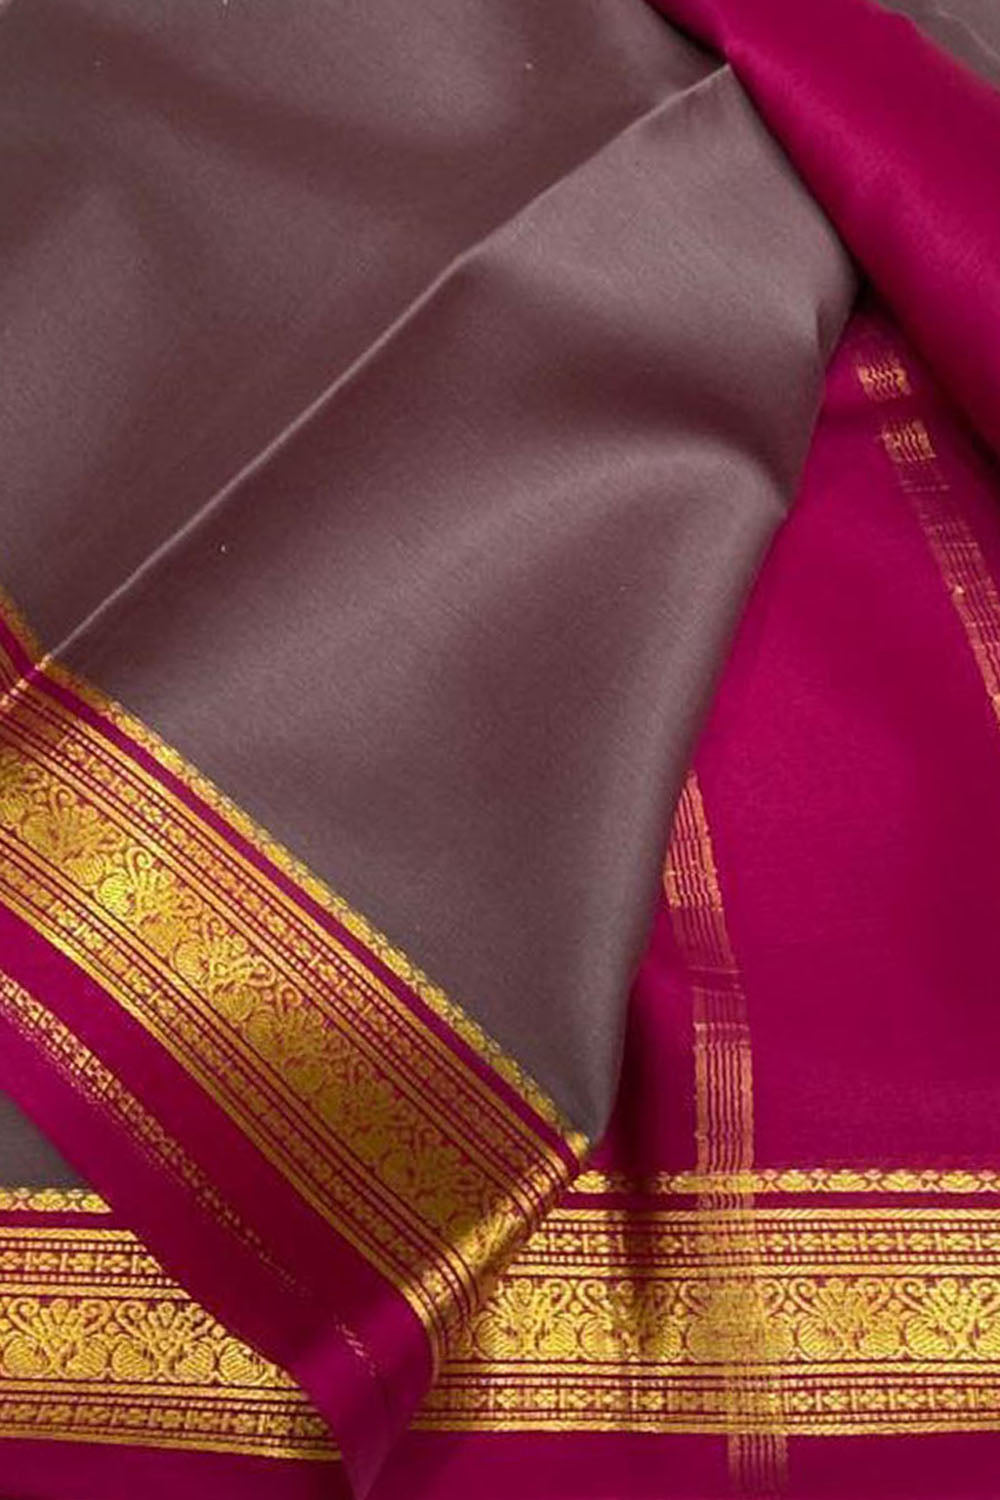 Best Place To Get Pure Mysore Silk Sarees Online in India - Sudarshan Store  If you're looking for the best place to get Pure Mysore Silk Crepe Sarees [  https://www.sudarshansaree.com/collections/pure-mysore-silk-crape-sarees -pure-mysore-silk-sarees ...